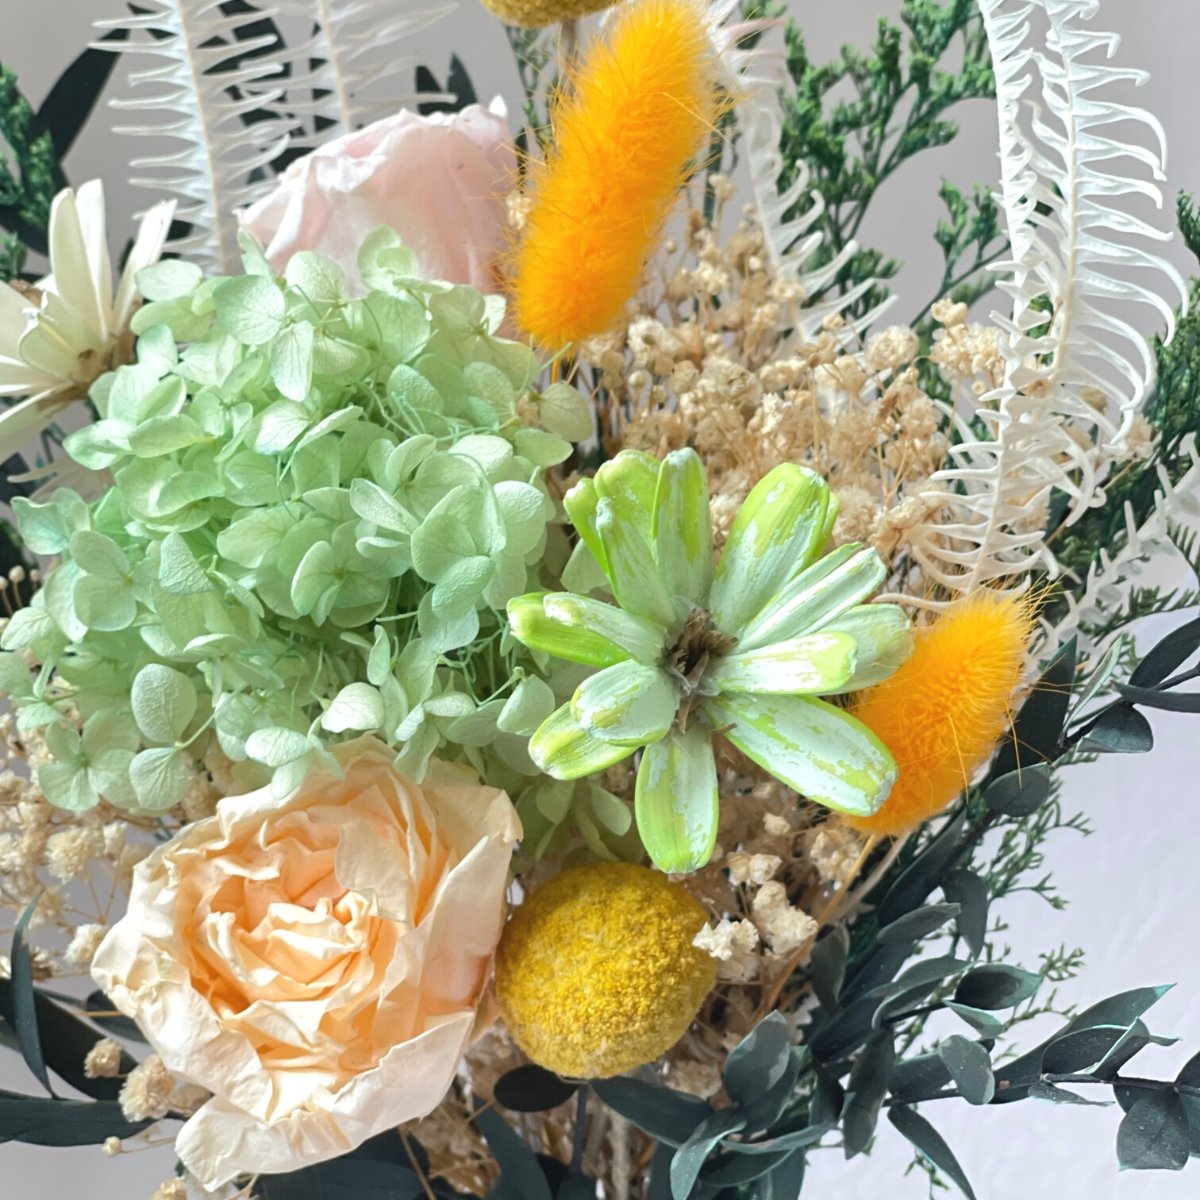 Kimi - きみ - Japanese Preserved Flower Arrangement - Flower - Preserved Flowers & Fresh Flower Florist Gift Store